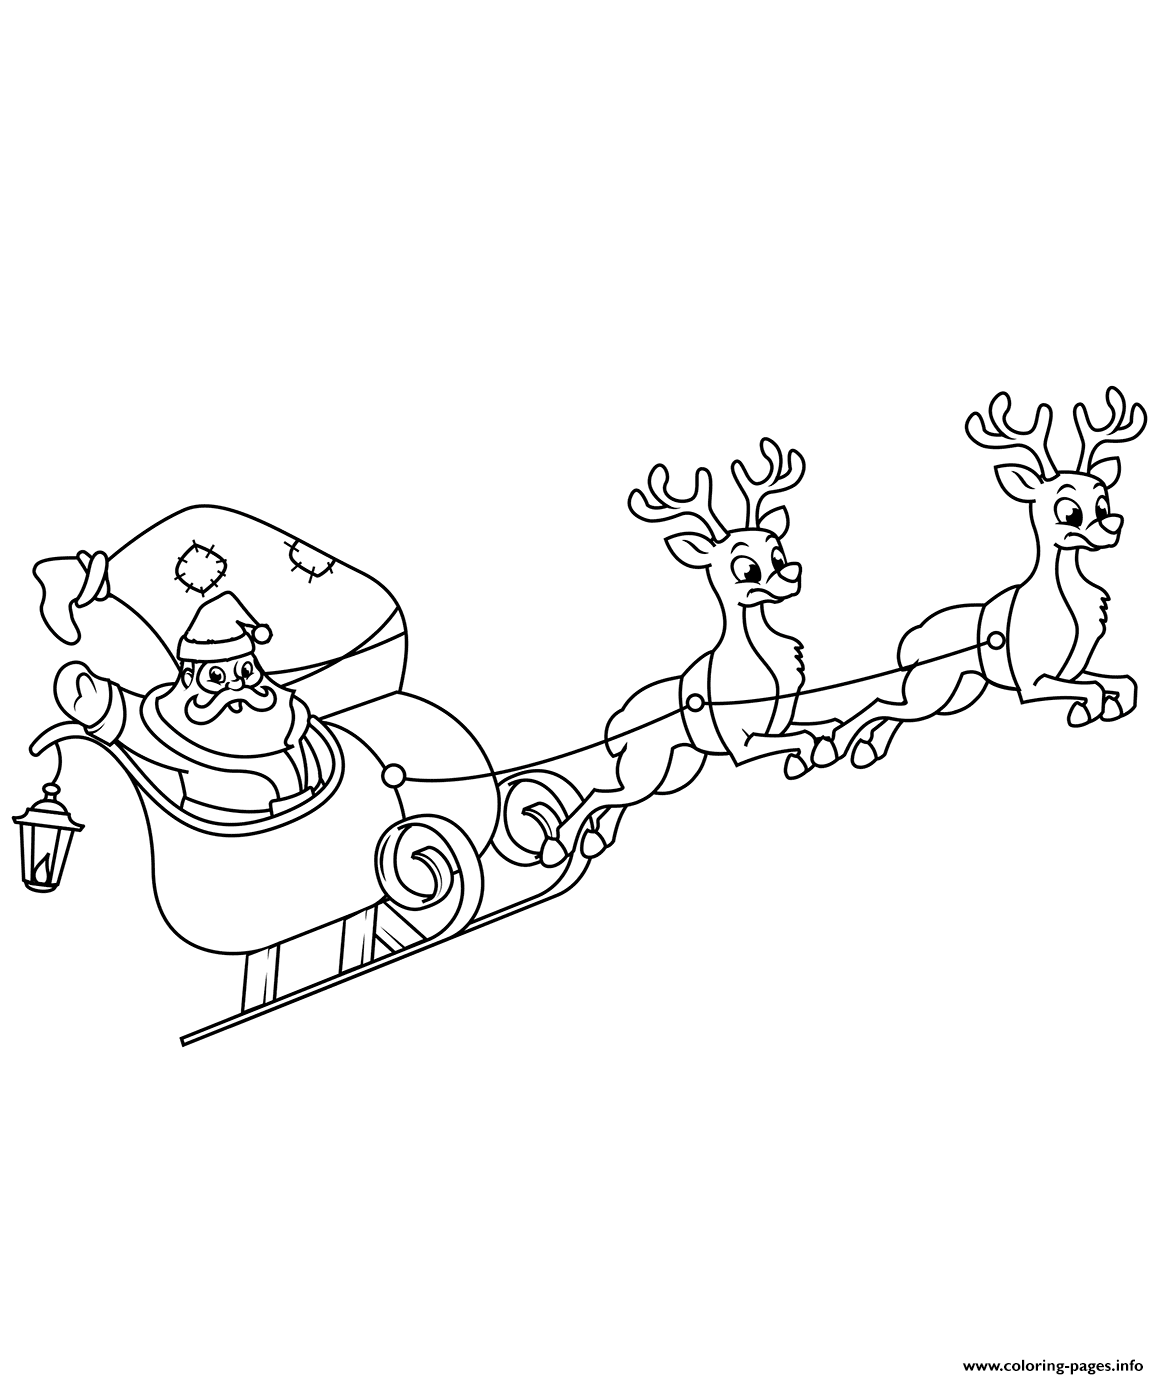 Santa Claus Riding His Sleigh Christmas Coloring Pages Printable